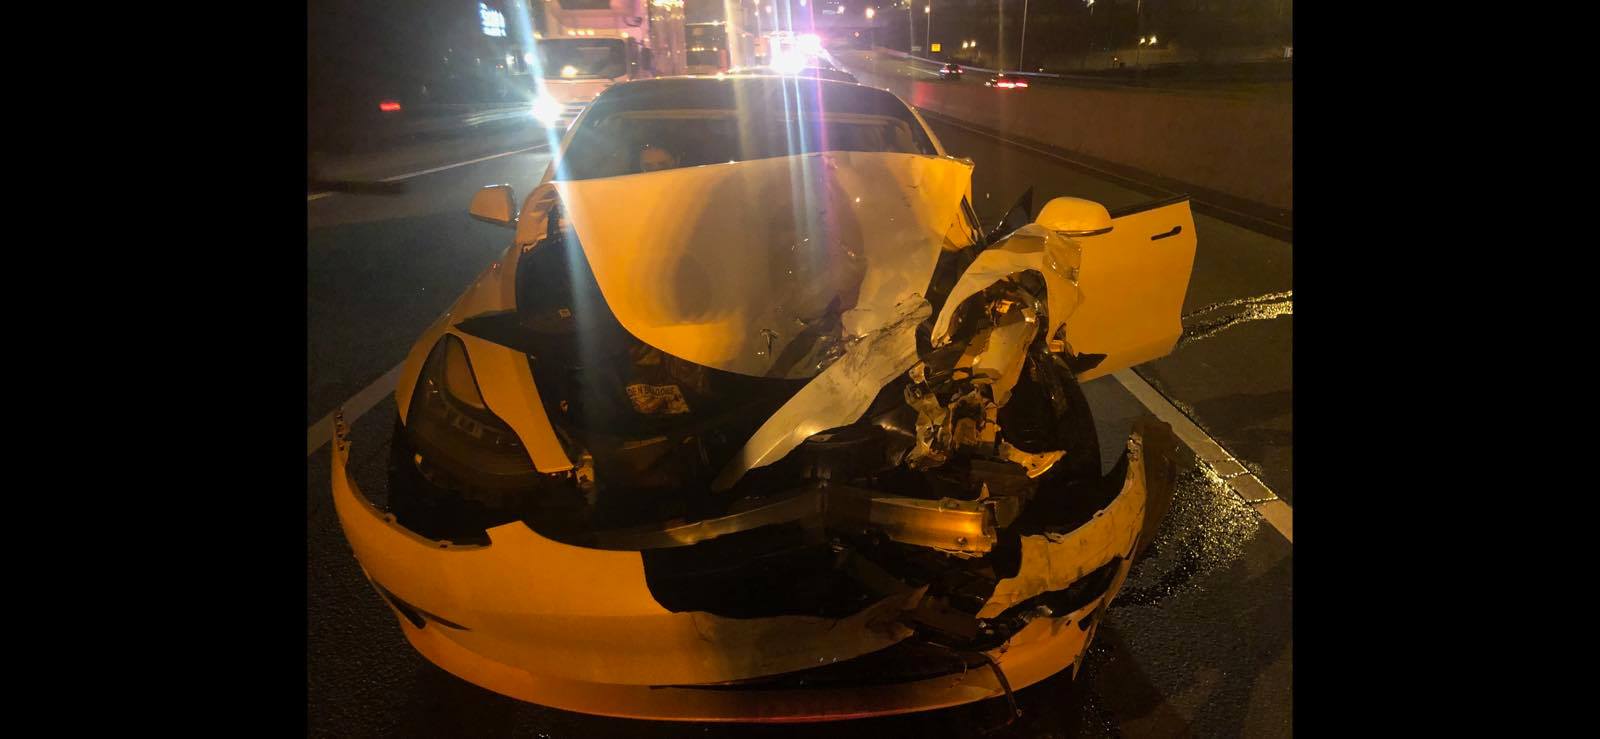 Two People Die As Tesla With No Driver Crashes | Silicon UK Tech News